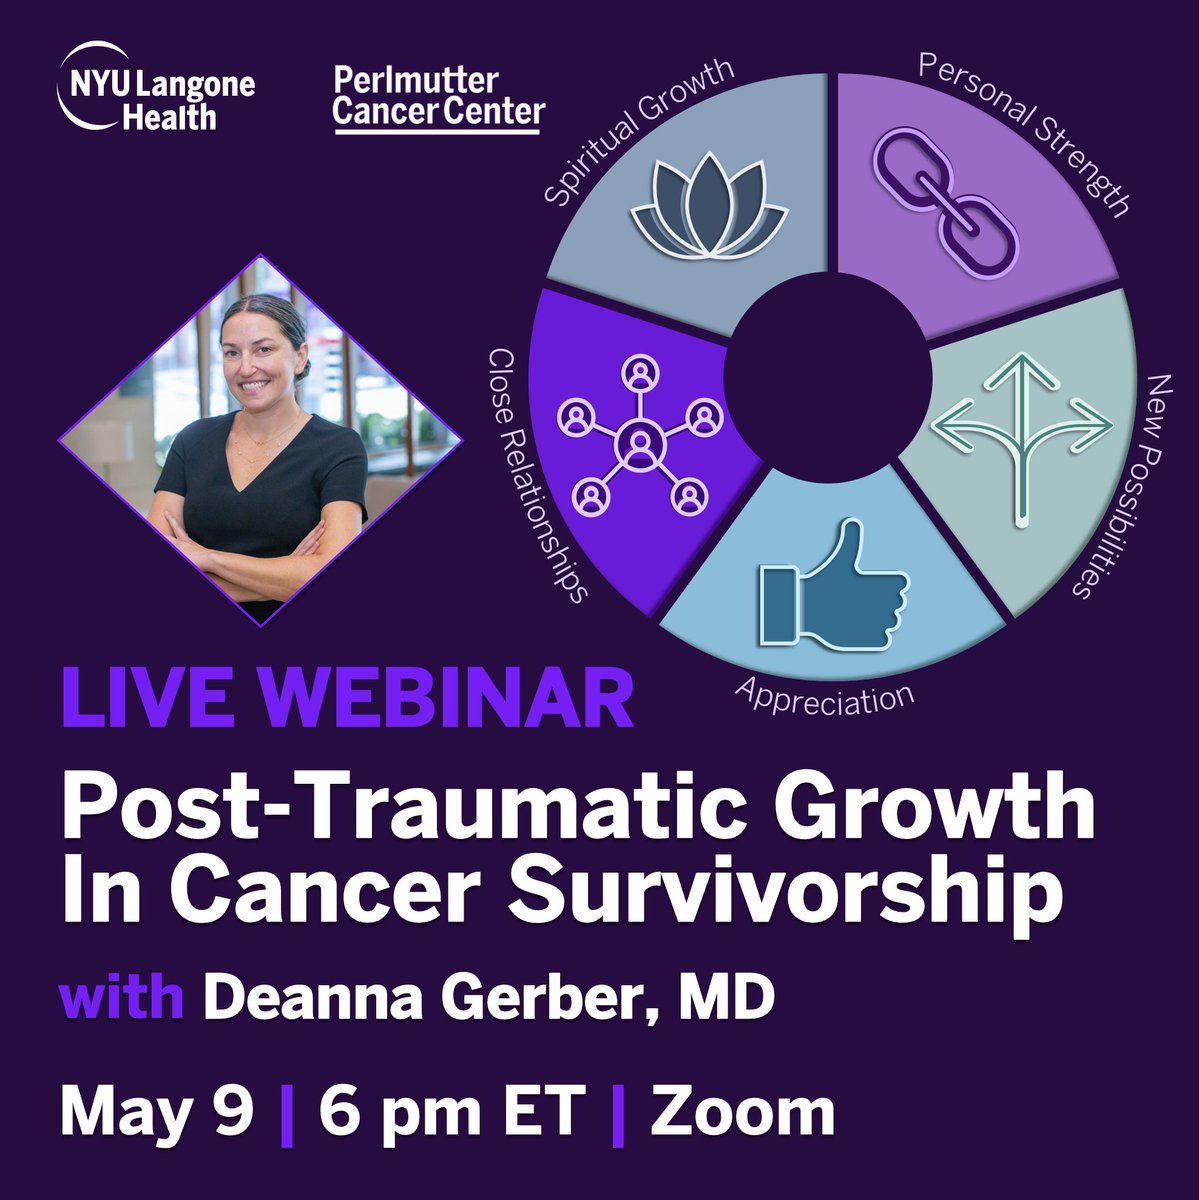 Experiencing cancer is deeply traumatic personally, emotionally & spiritually, yet facing adversity can yield equally profound change. Tonight at 6PM ET join #cancersurvivor Dr. Deanna Gerber to learn about cultivating growth in #survivorship. Register: bit.ly/3wrEEnZ